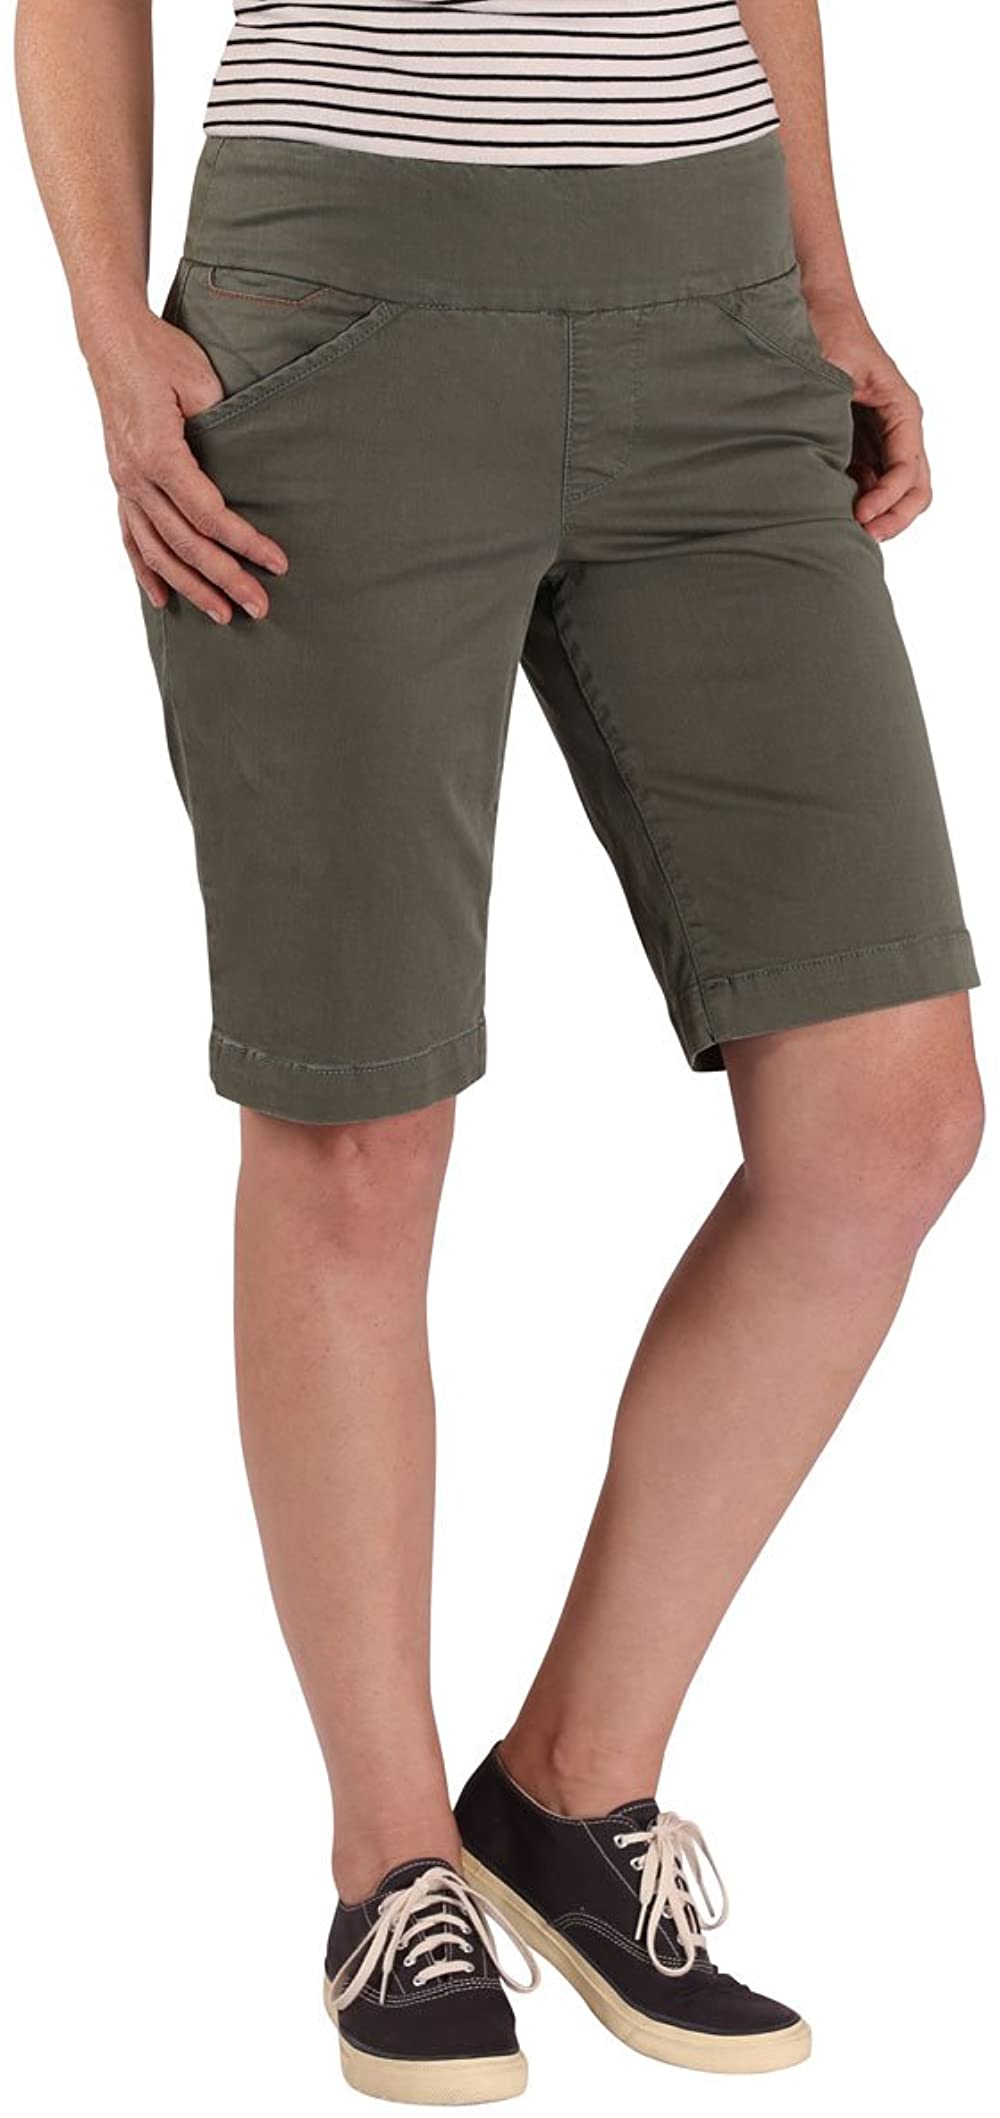 SATINIOR Womens 10 Inseam Bermuda Shorts Ease in to Pull on City Shorts Comfort Modern Fit Urban Shorts with 2 Side Pockets